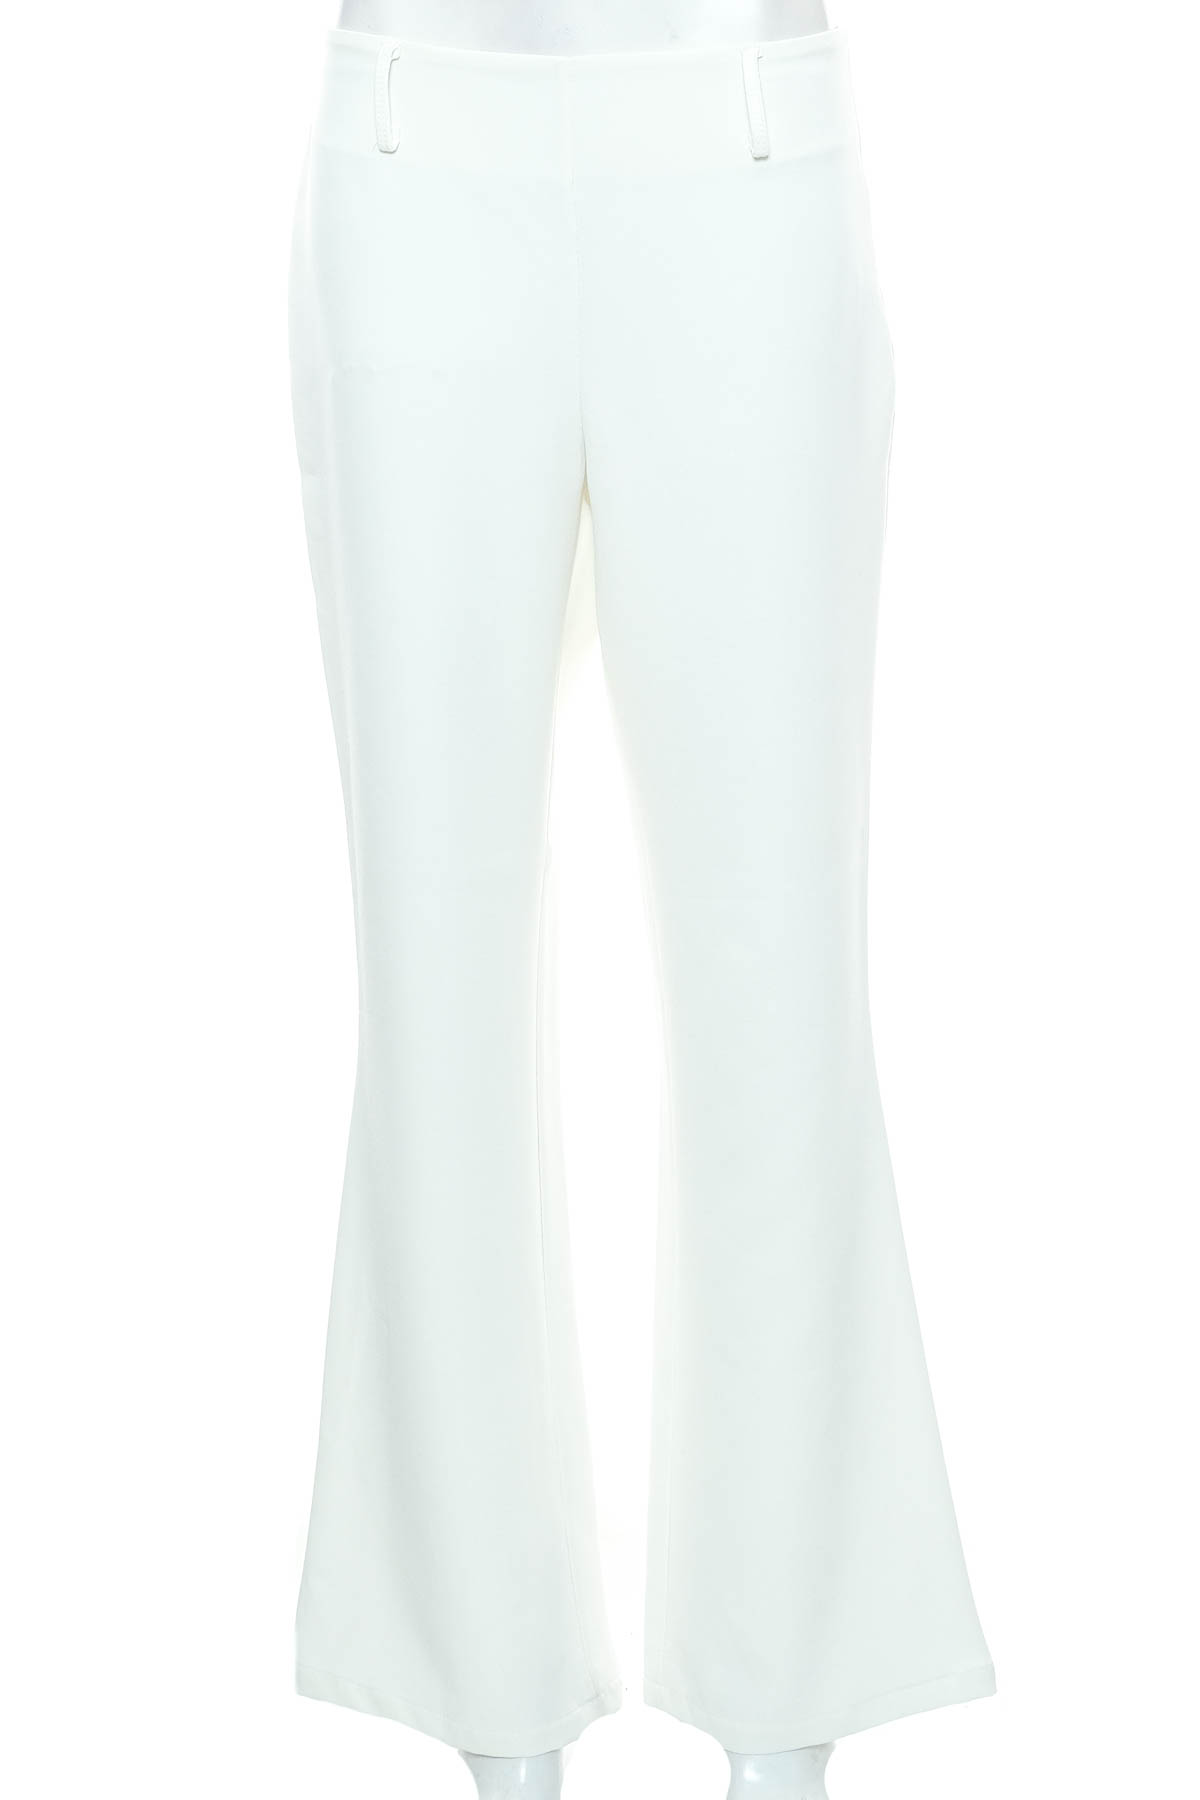 Women's trousers - MW MOST WANTED - 0